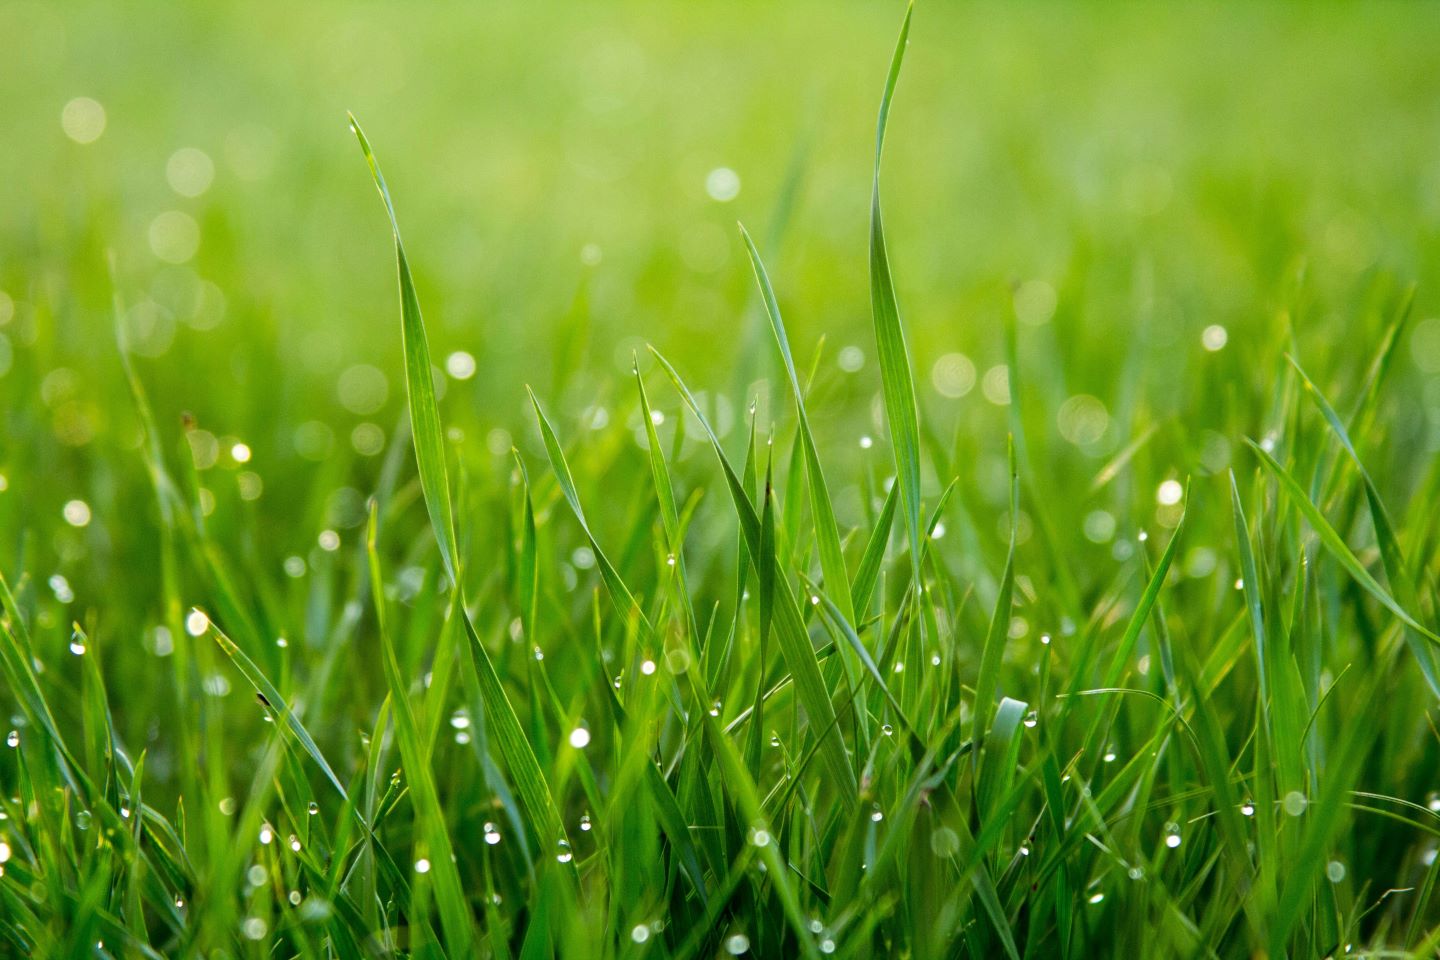 Close-up shot of grass blades with dew drops in bright, natural light.